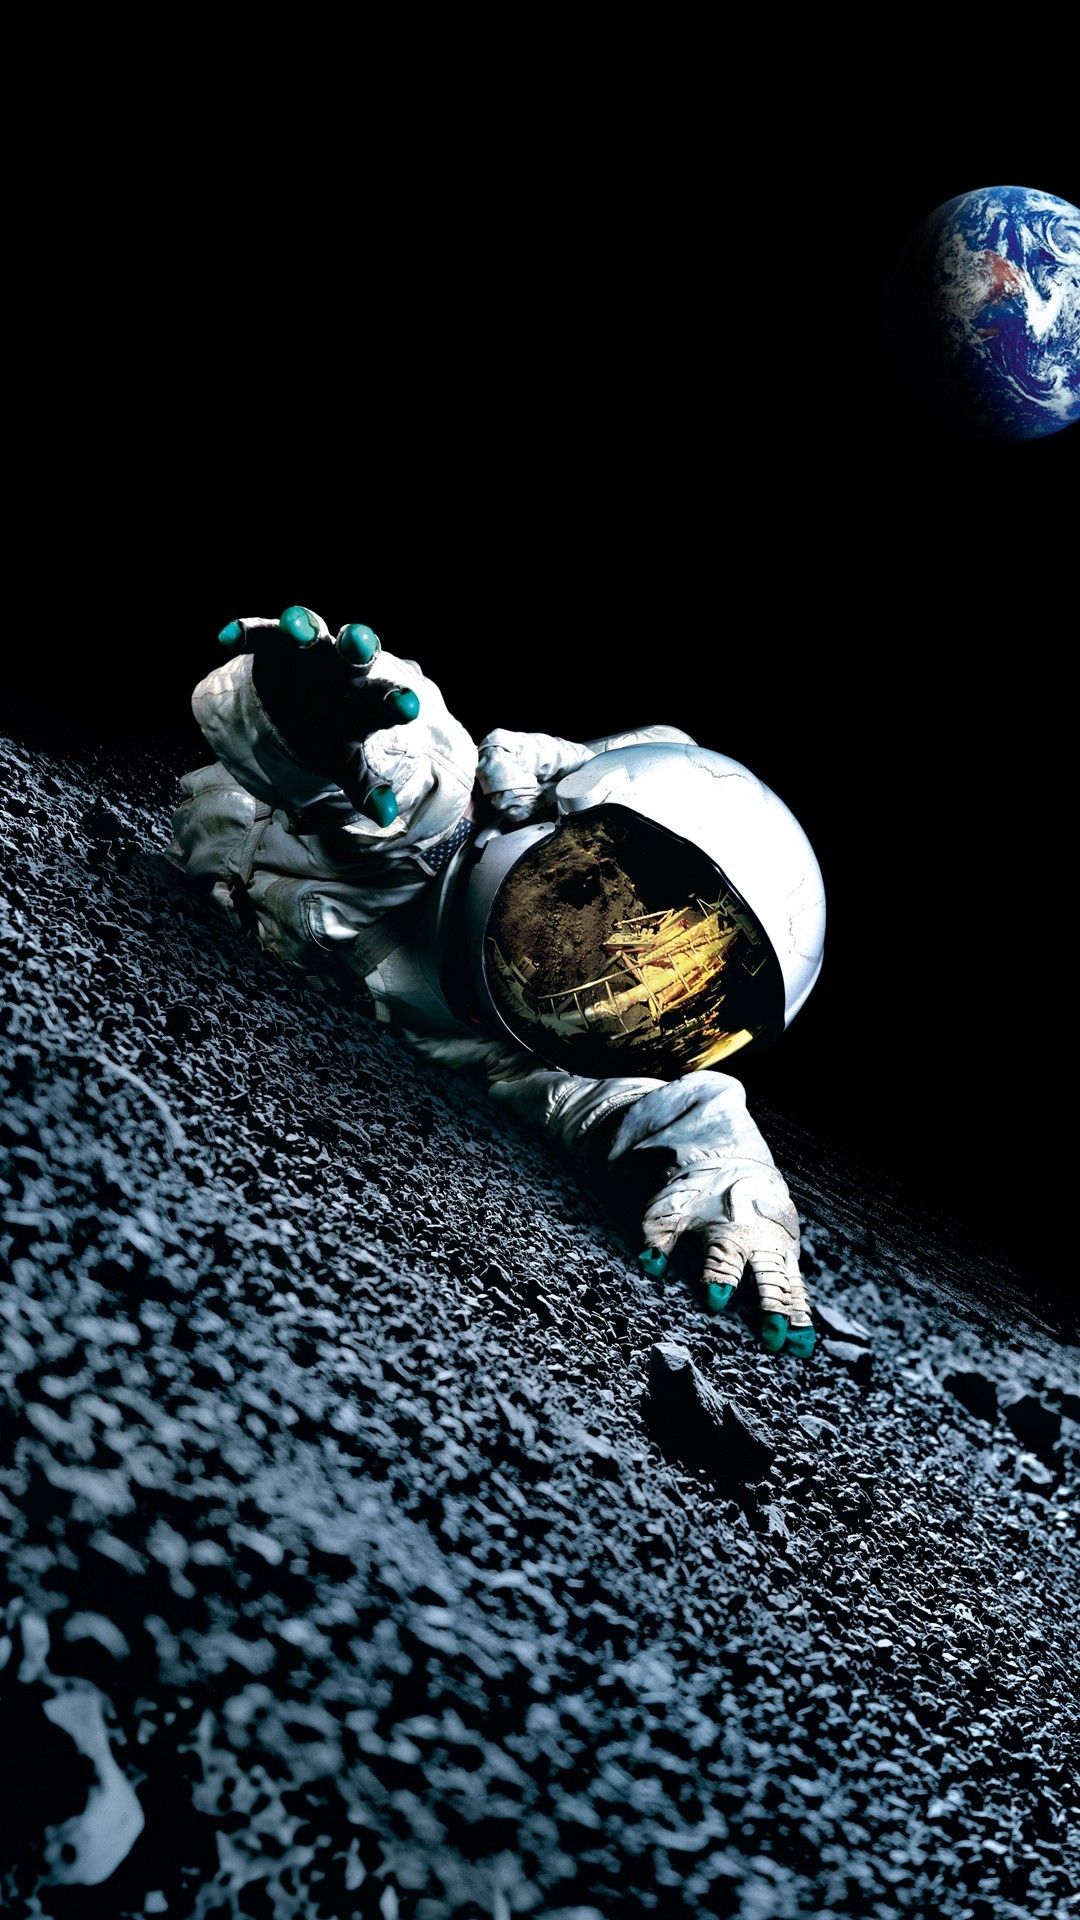 Apollo 18 htc one wallpaper, free and easy to download